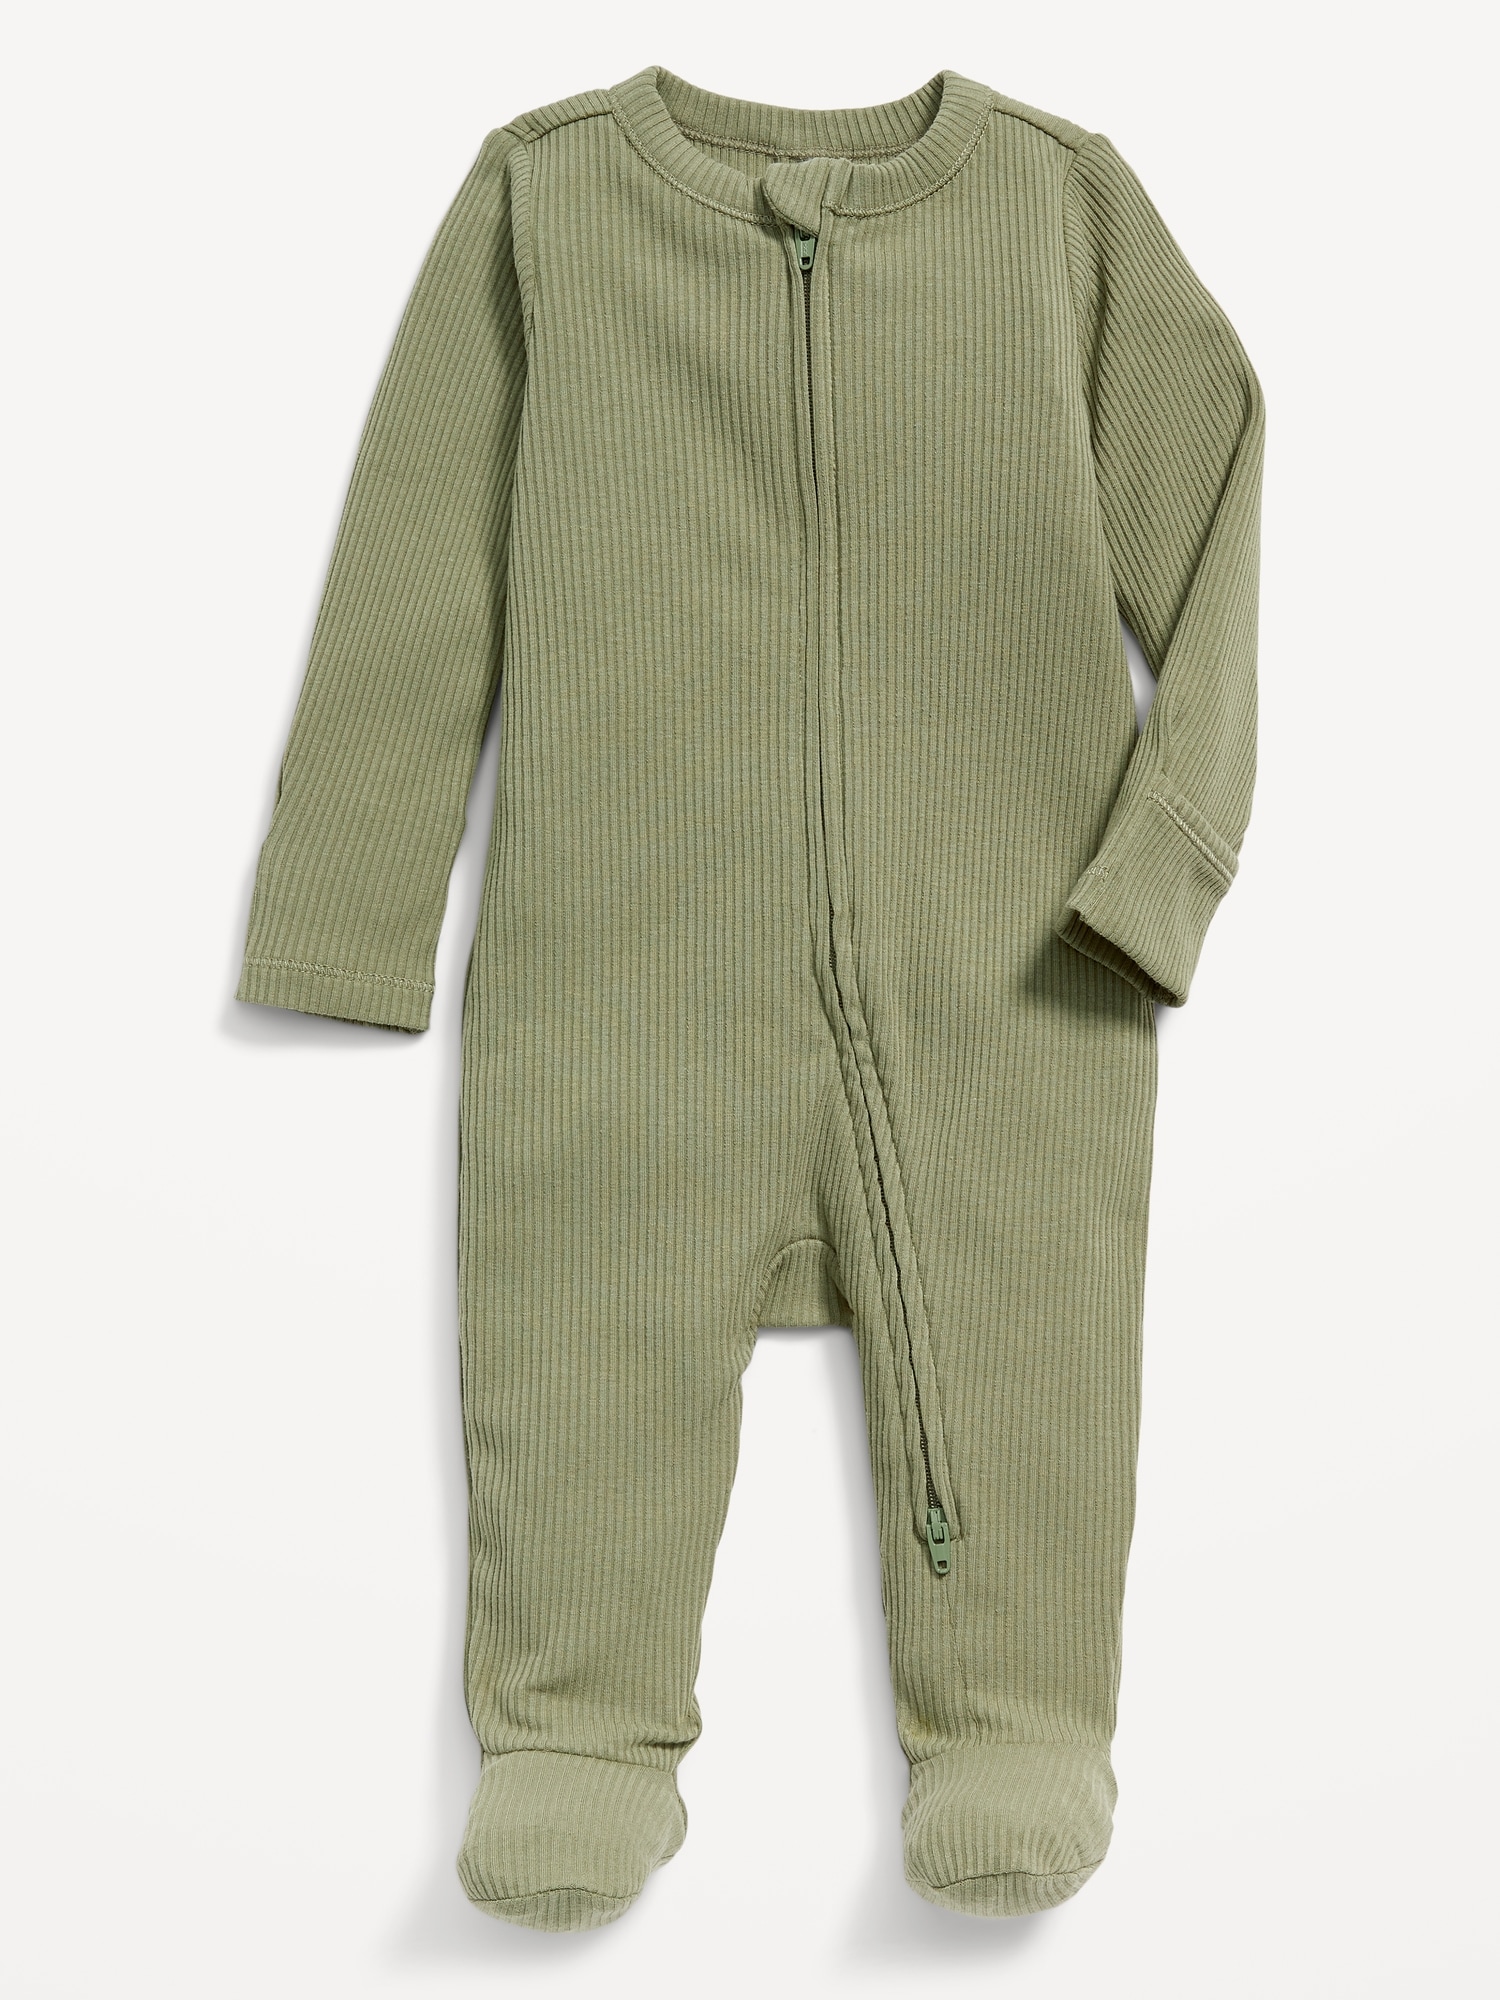 Old Navy Unisex 2-Way-Zip Sleep & Play Footed One-Piece for Baby brown. 1